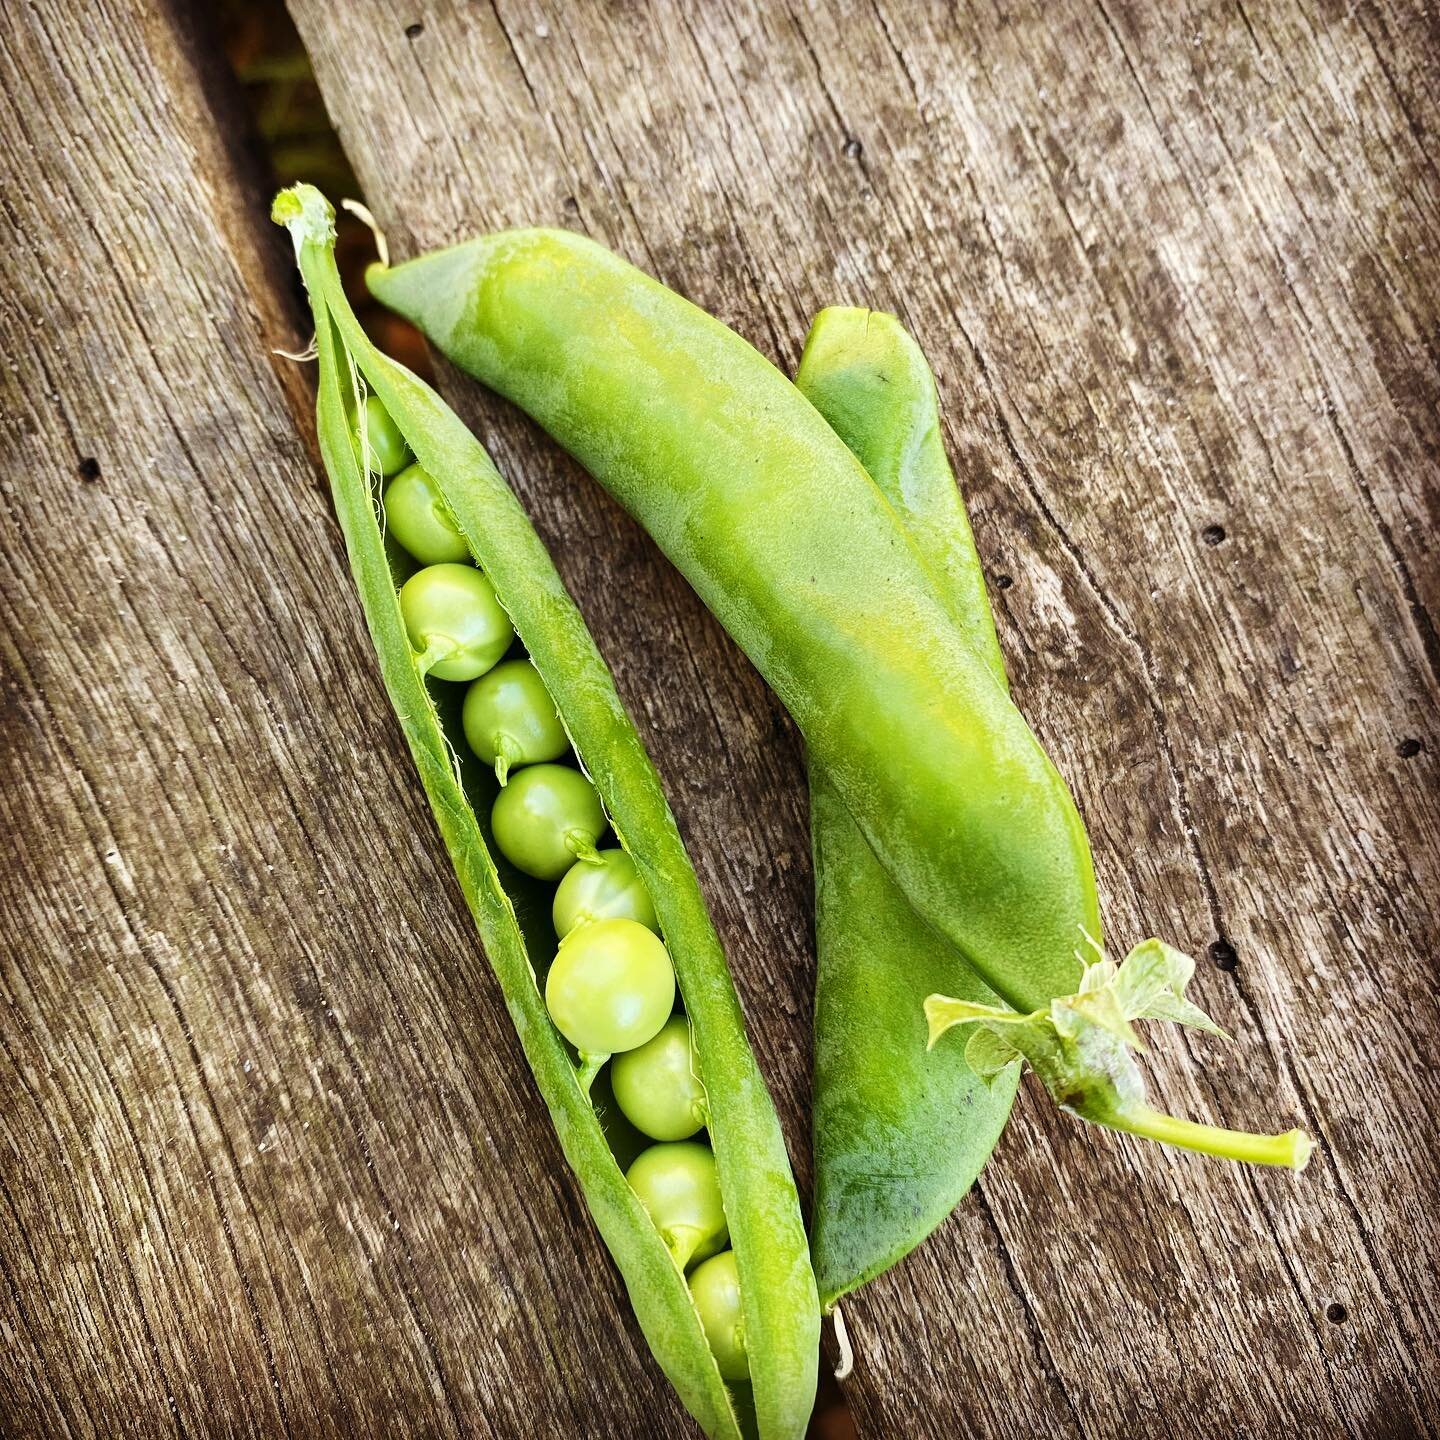 The first of the pea crop  #peas #communitygardens #newport2106